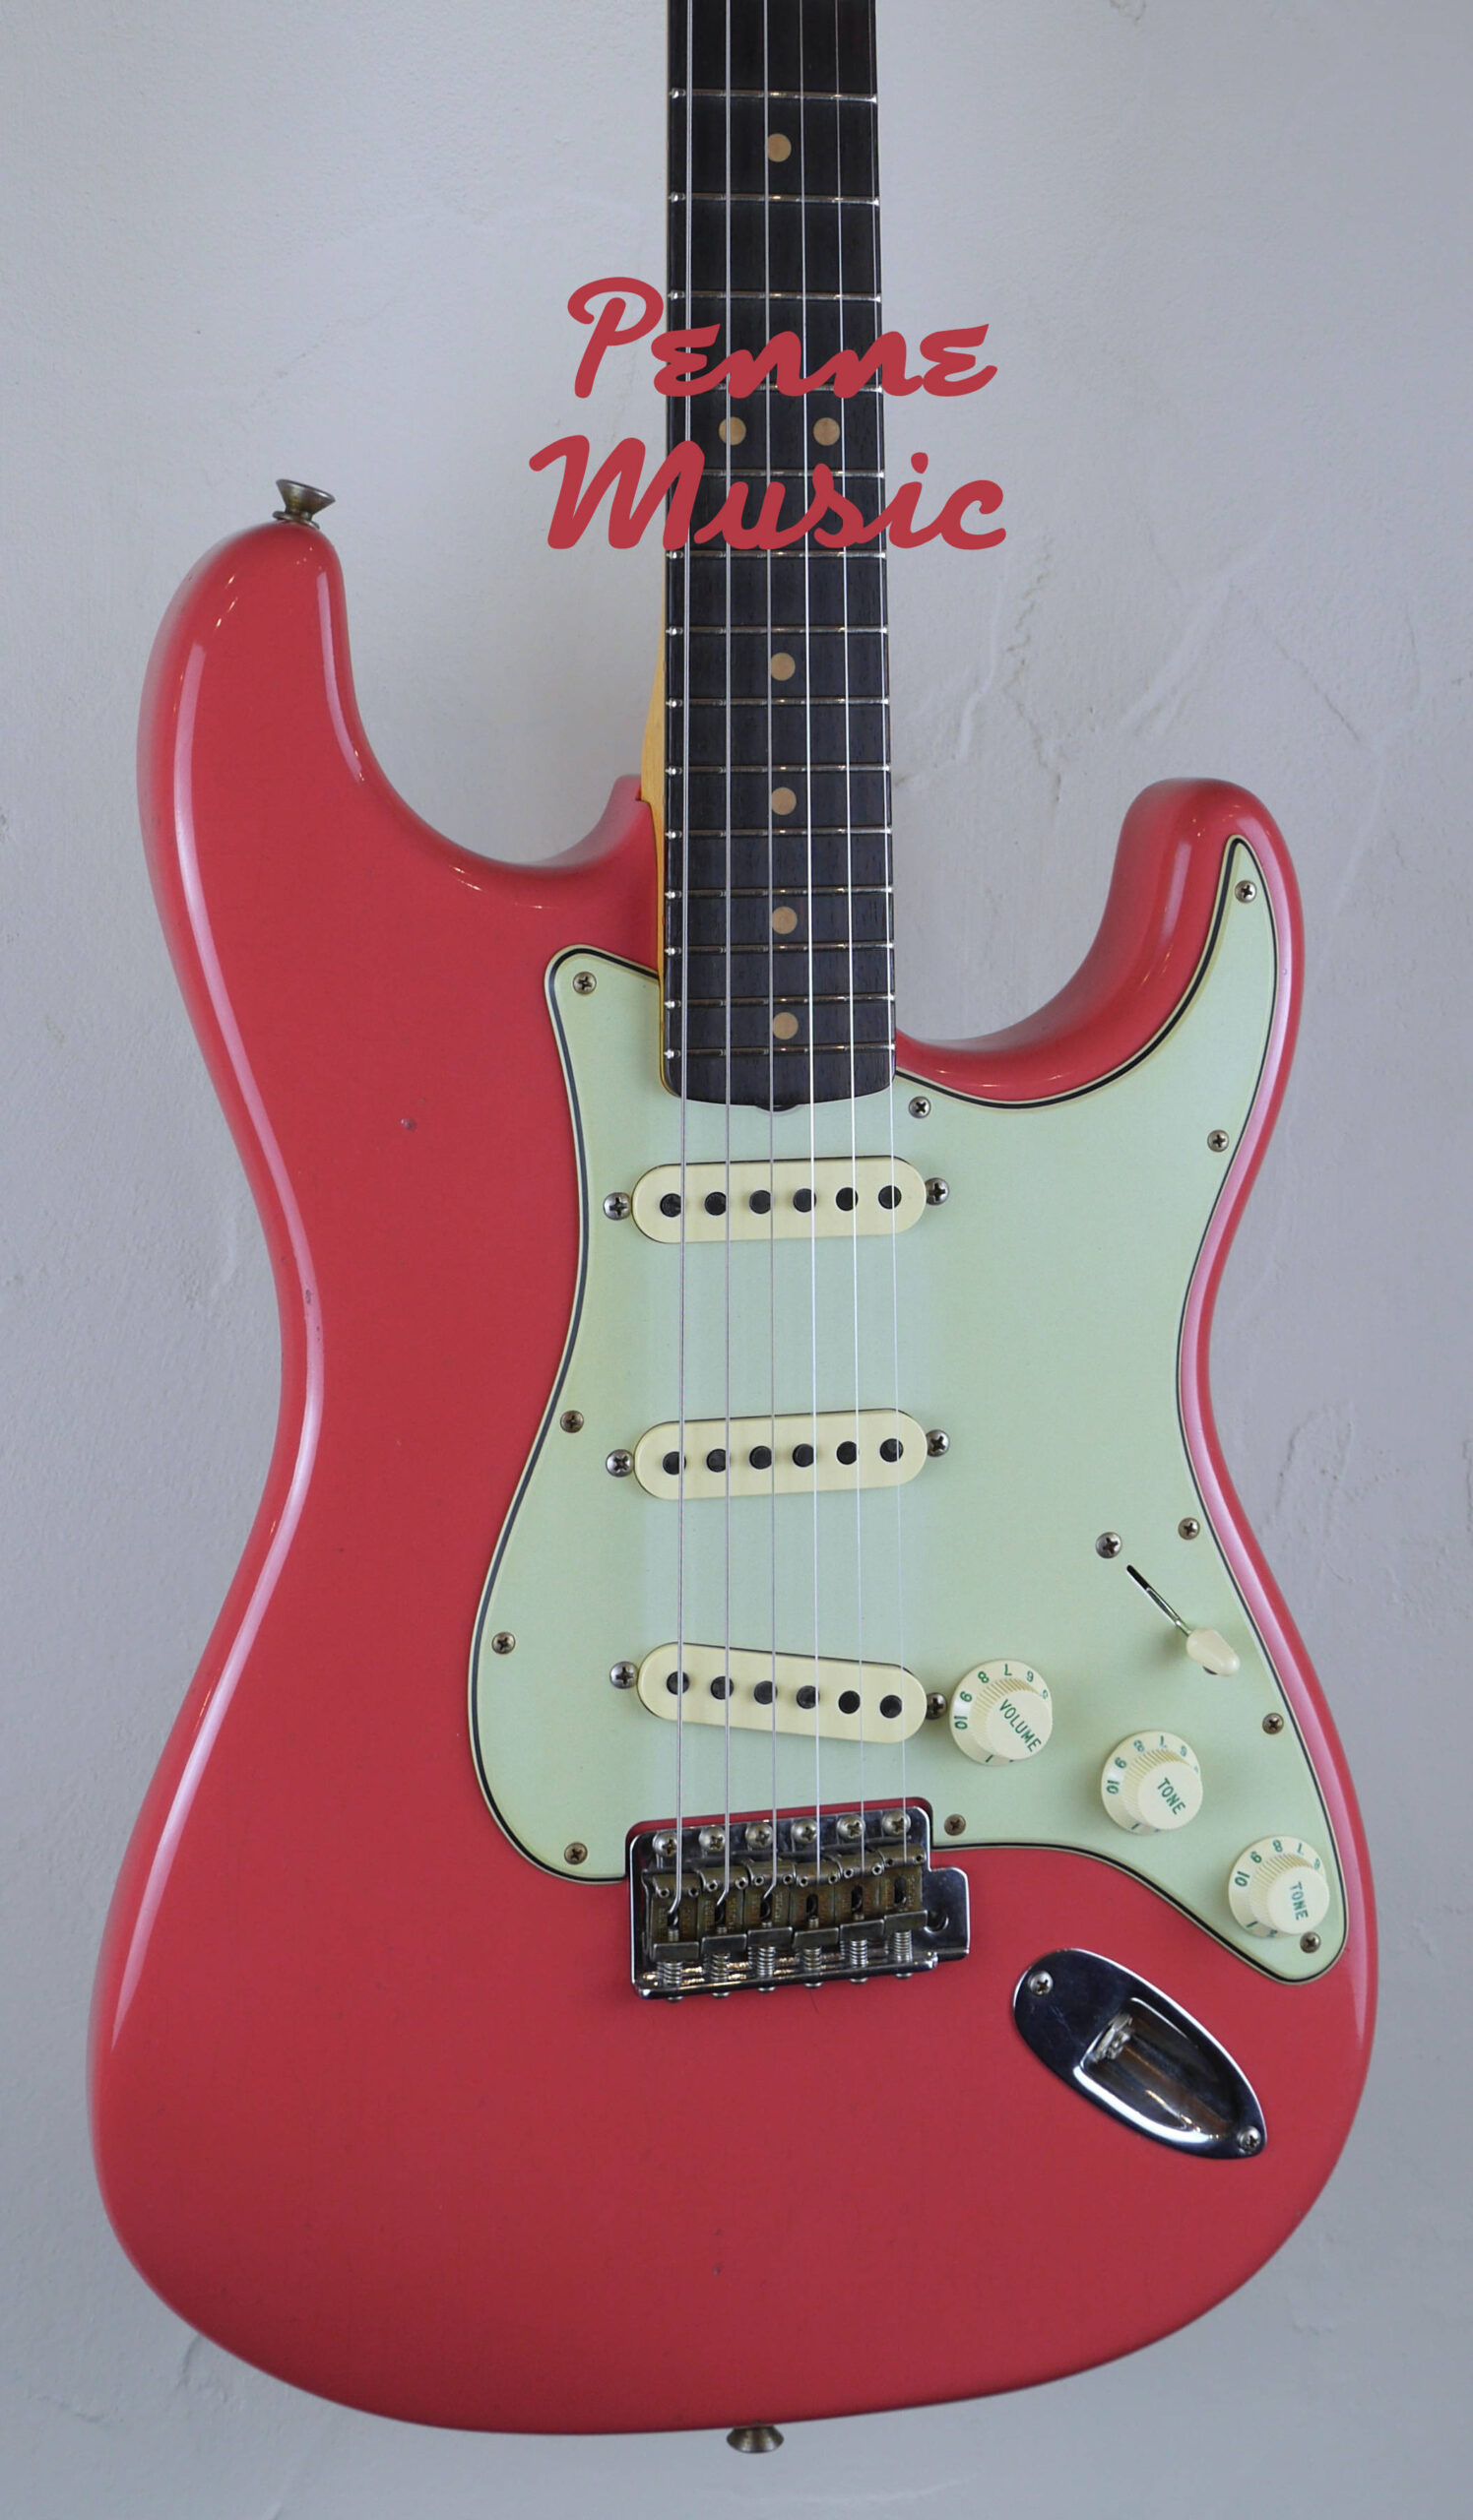 Fender Custom Shop Time Machine 1964 Stratocaster Faded Aged Fiesta Red J.Relic 4